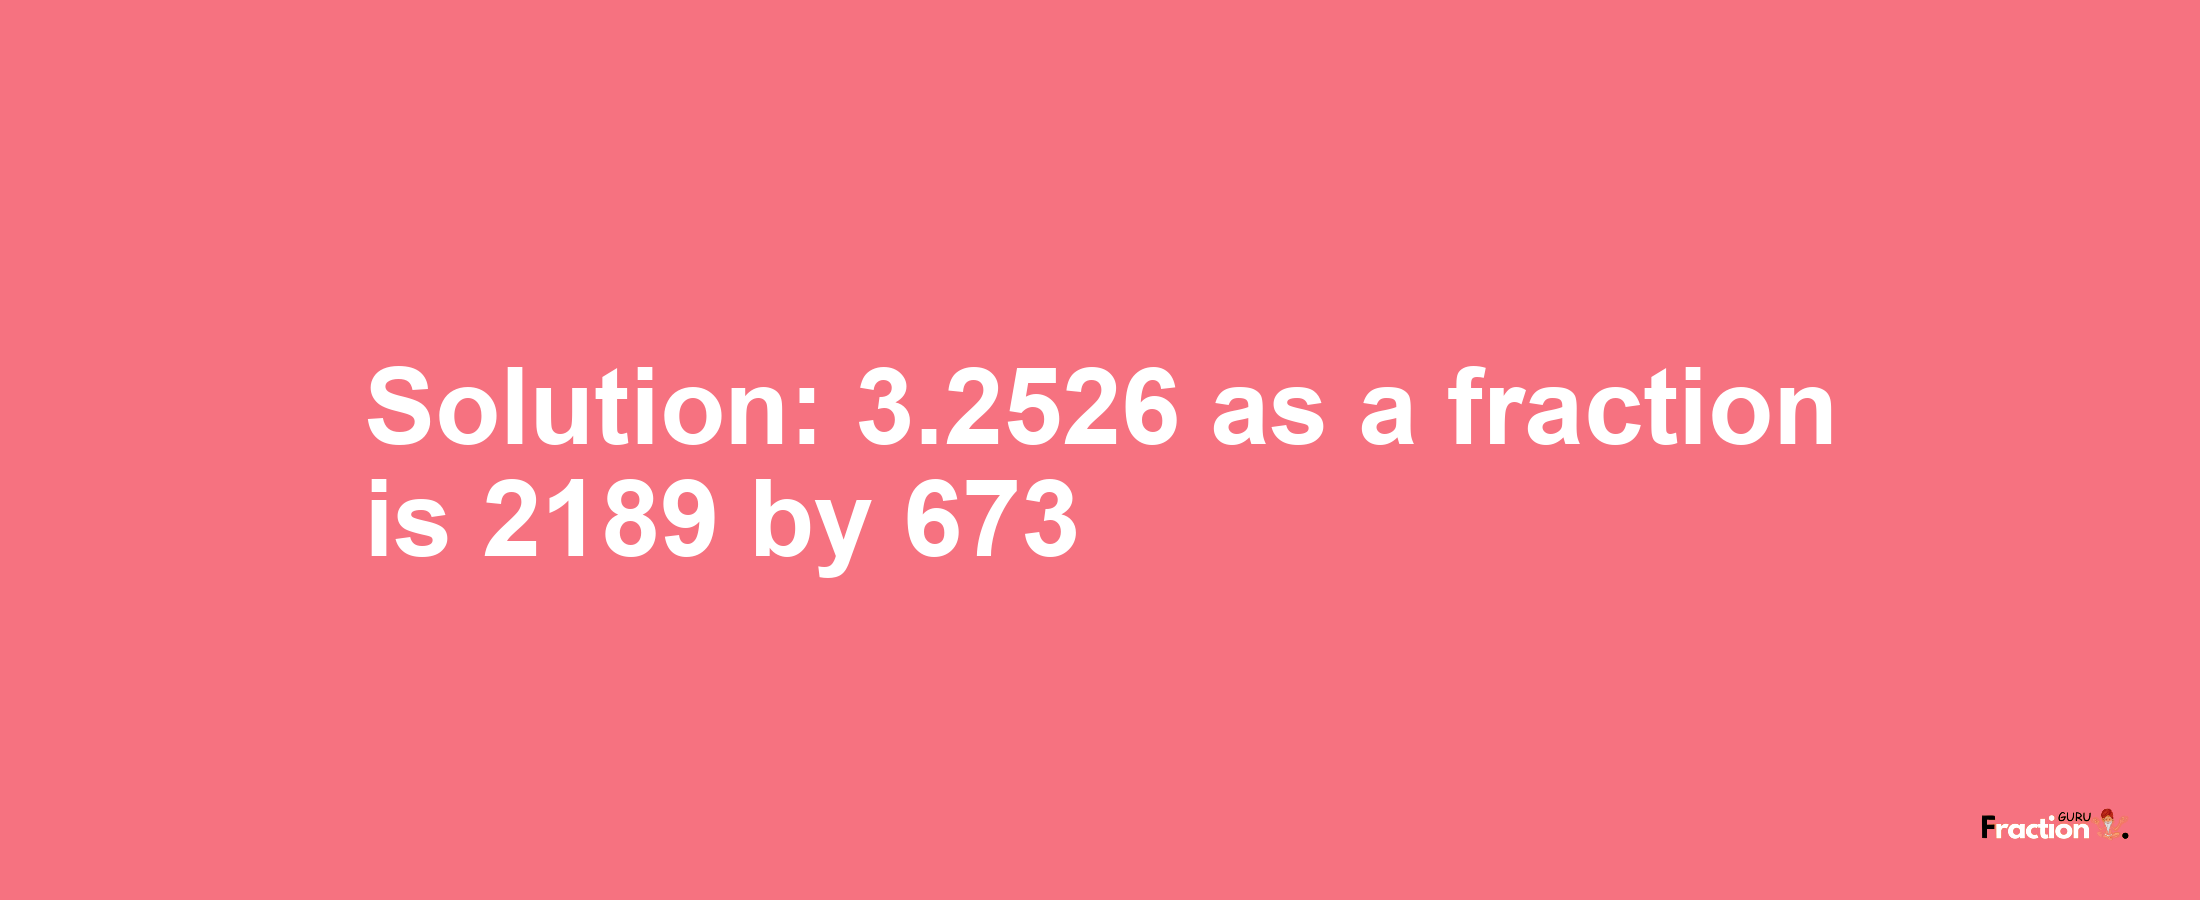 Solution:3.2526 as a fraction is 2189/673